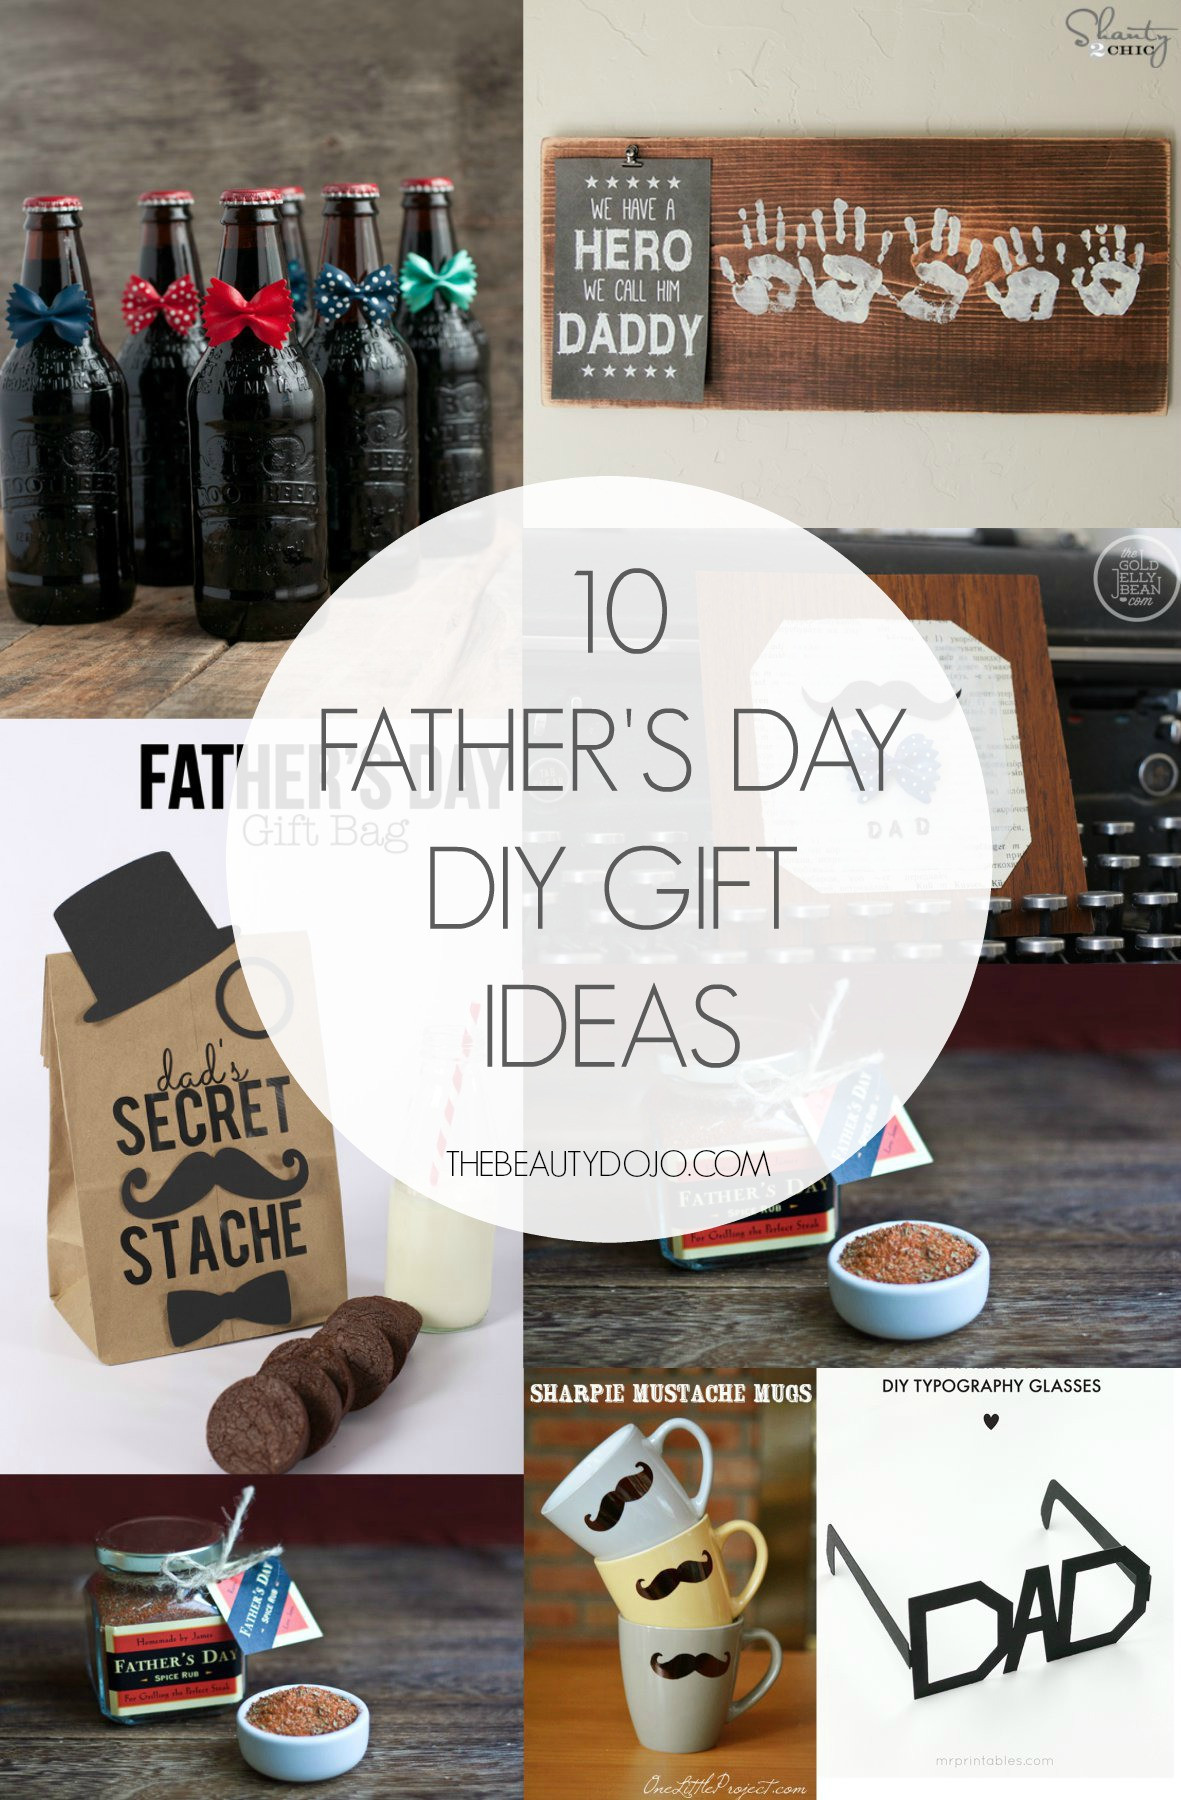 DIY Fathers Day Gifts From Kids
 10 Father s Day DIY Gift Ideas The Beautydojo